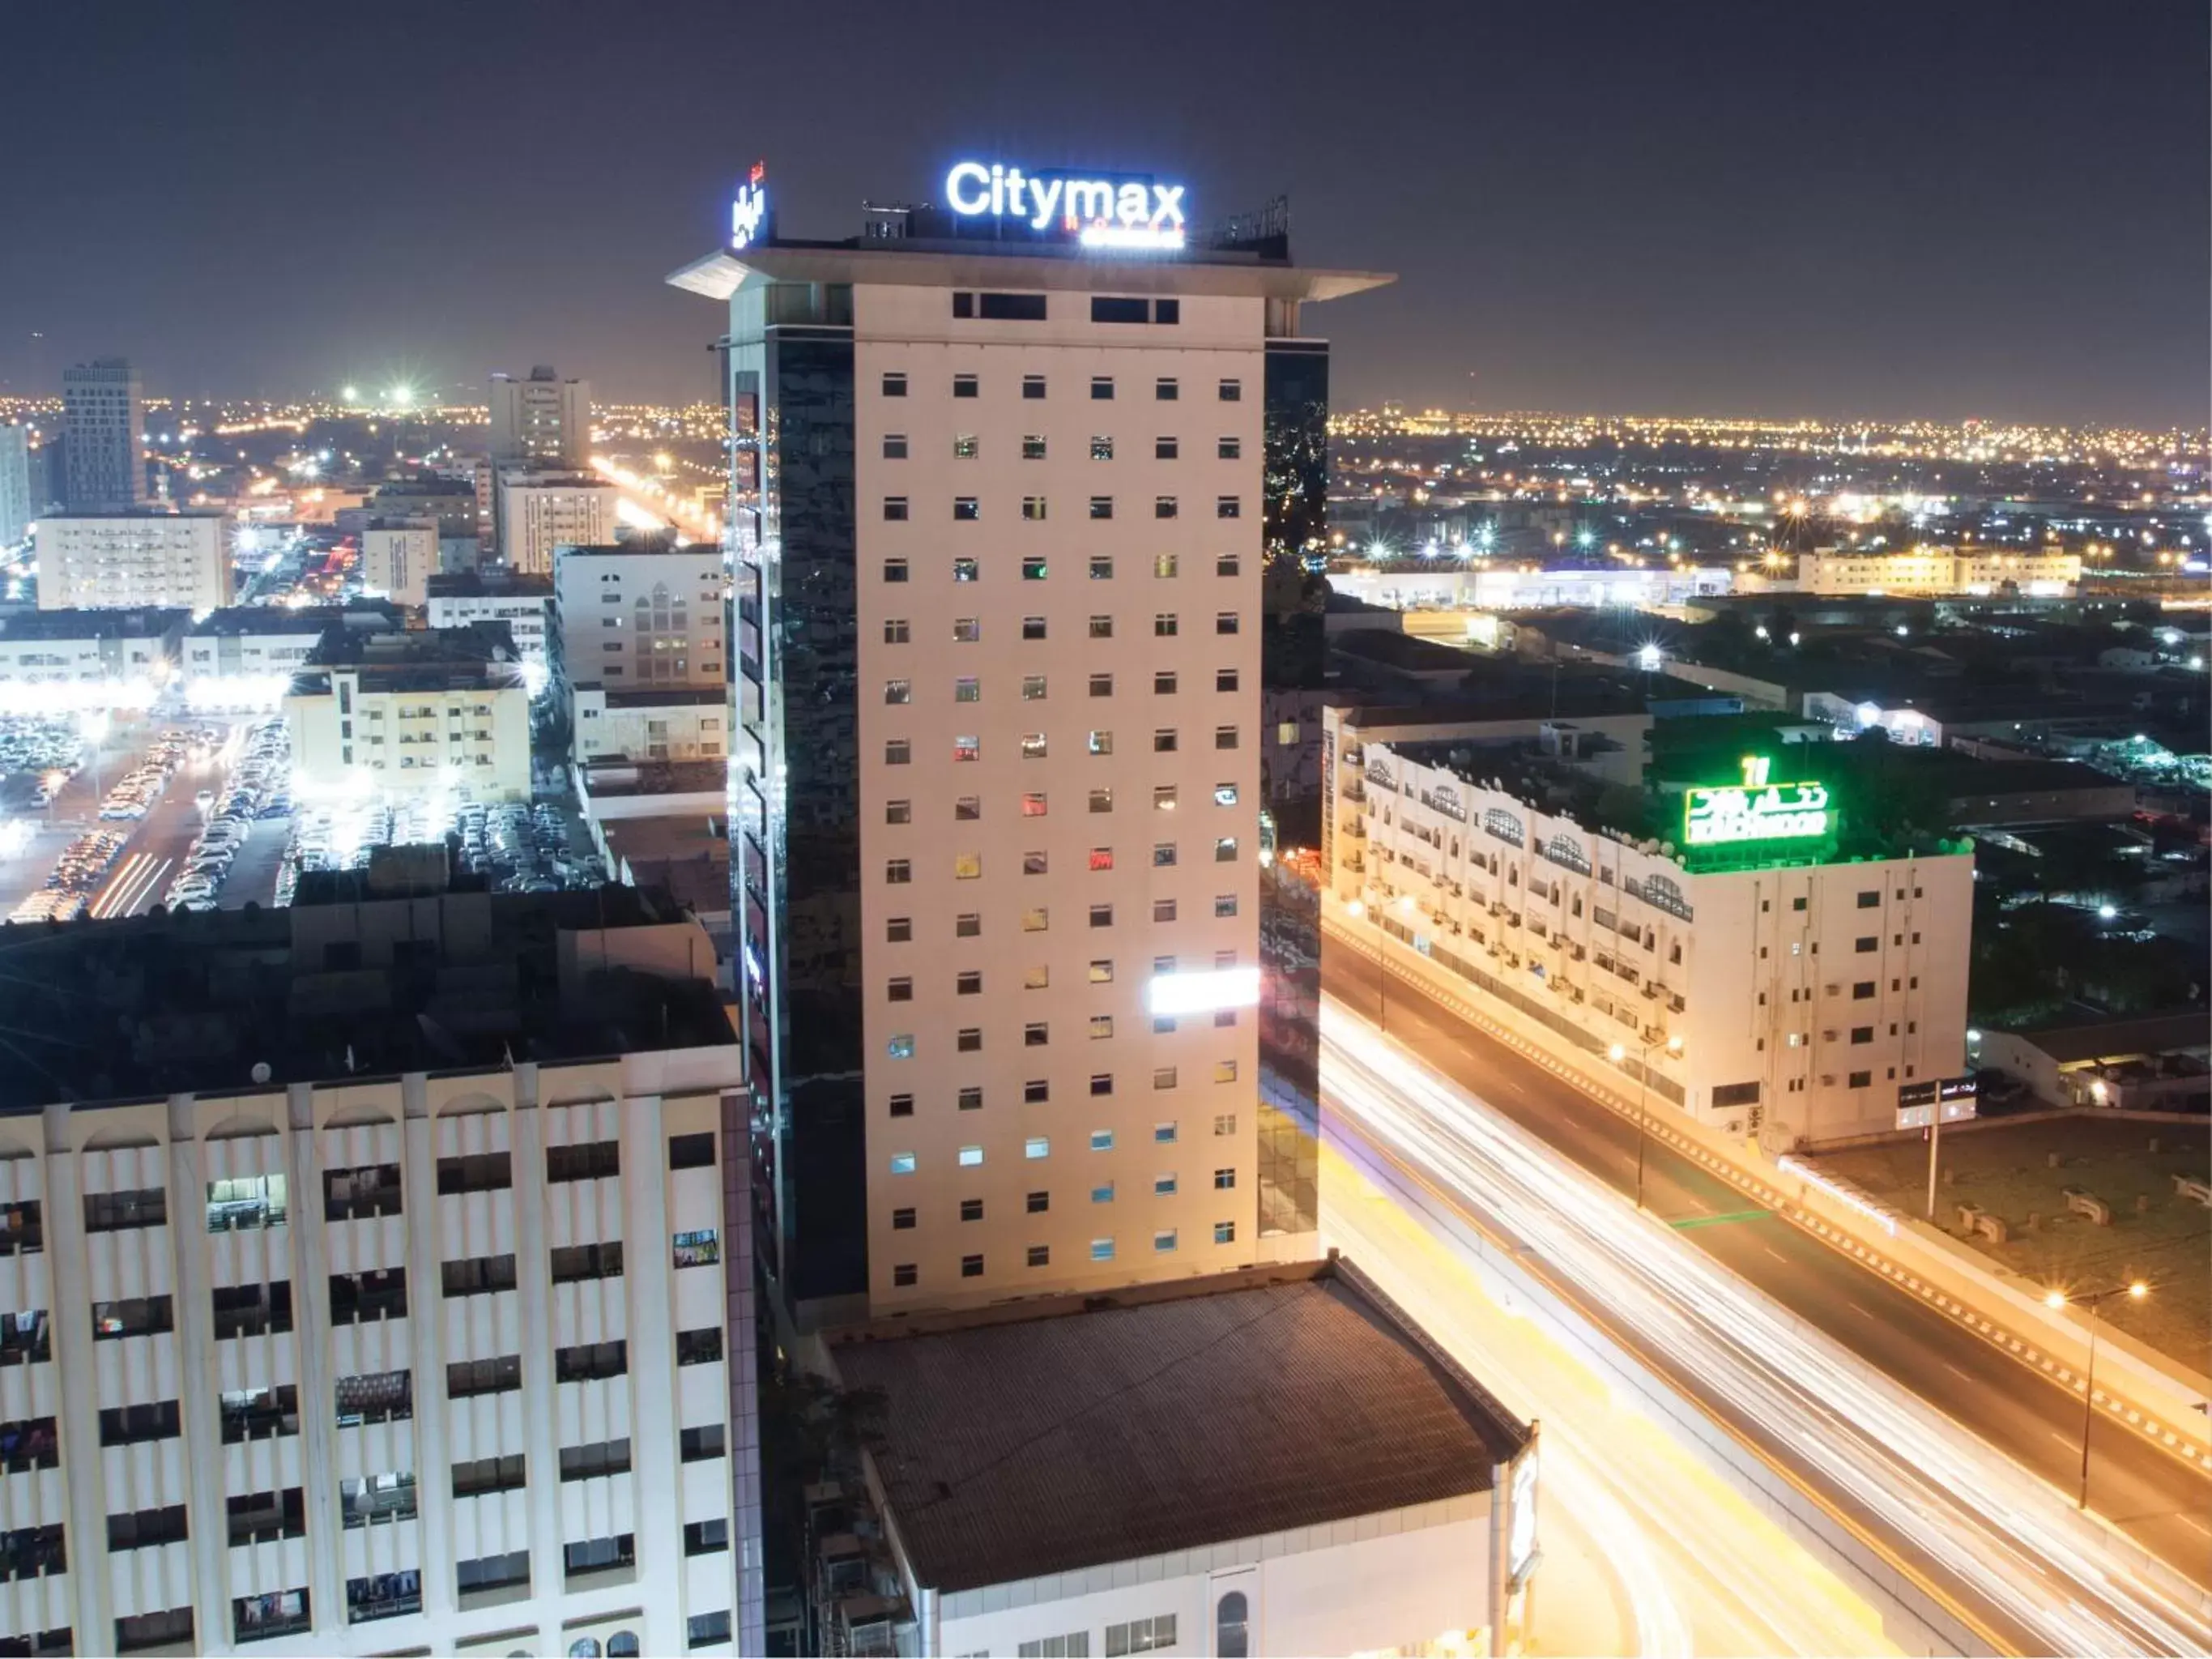 Area and facilities in Citymax Sharjah